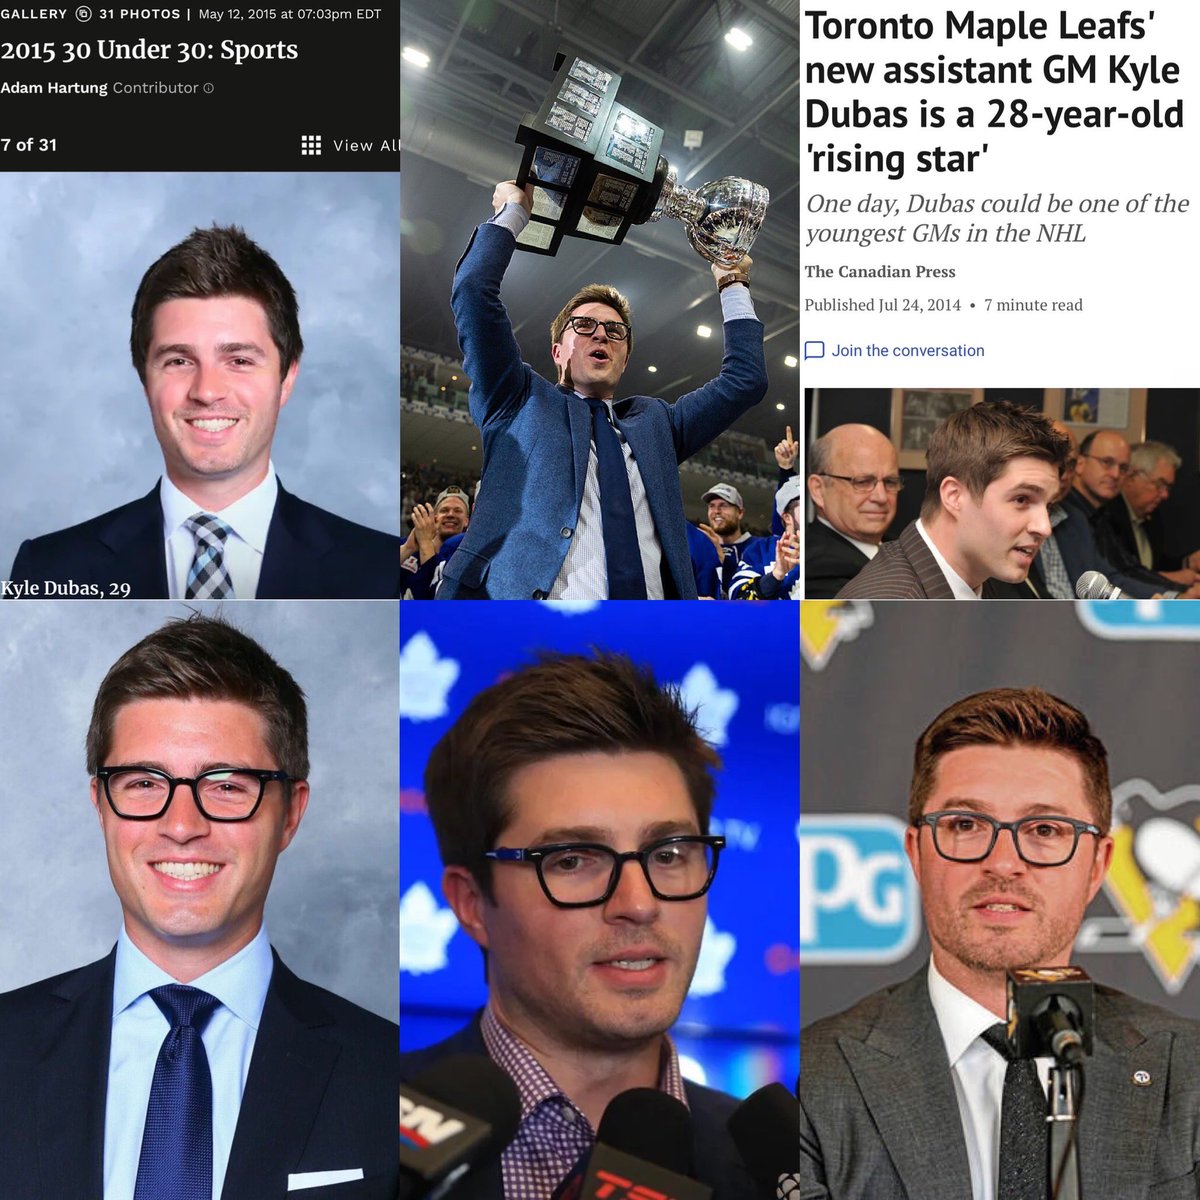 I have the upmost confidence in this man. @kyledubas 

I wouldn’t trade my GM for your GM any day of the week.

He’s the right guy for this job. 

Trust the process.

Hextall ruined this team. 
Dubas has done a good job rebuilding it, but the job isn’t done.

Goodnight ✌️